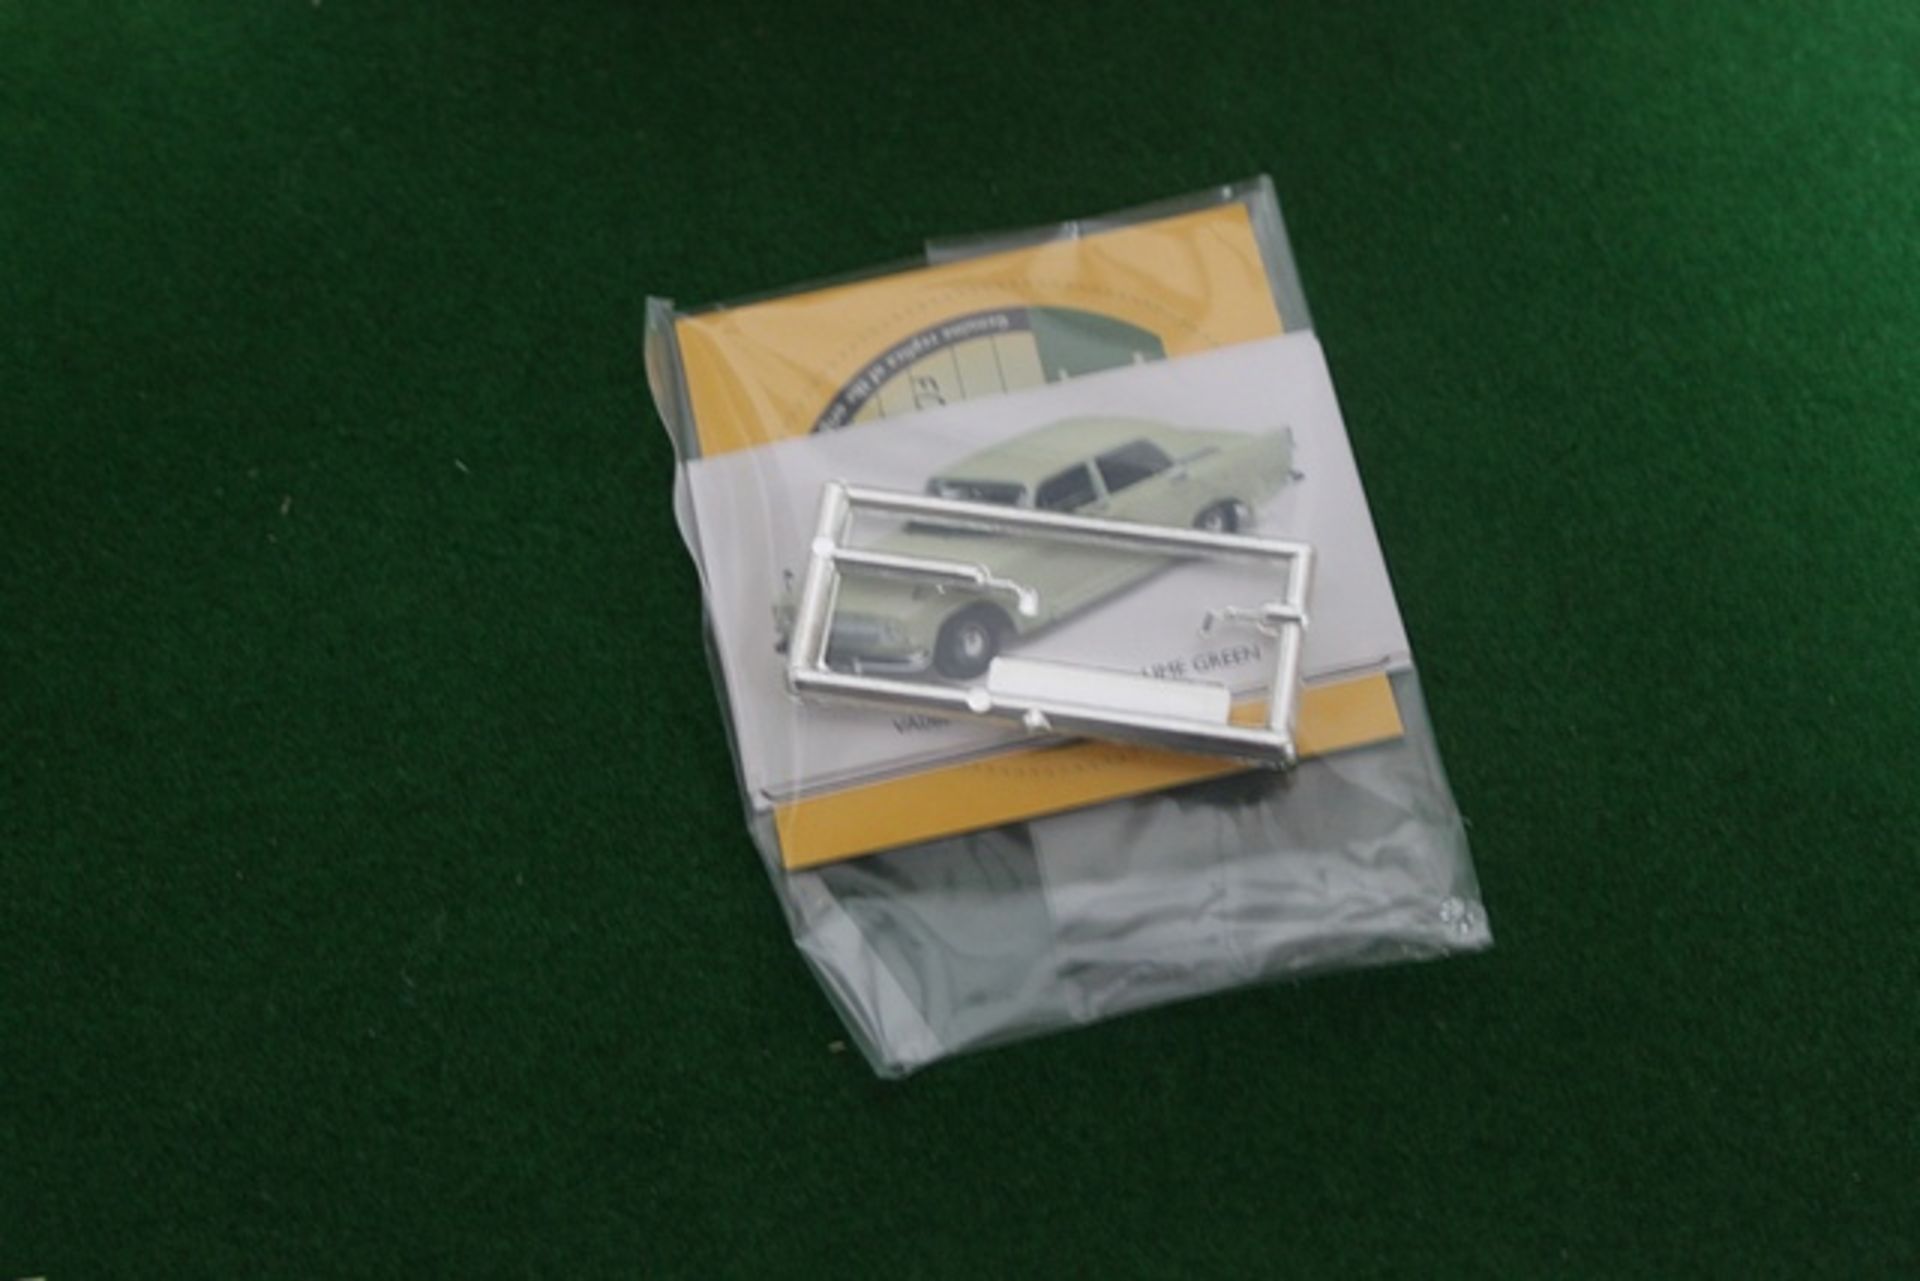 Vanguards # VA06000 Diecast Ford Zephyr 4 Mark III In Lime Green Scale 1/43 Complete With Box - Image 3 of 3